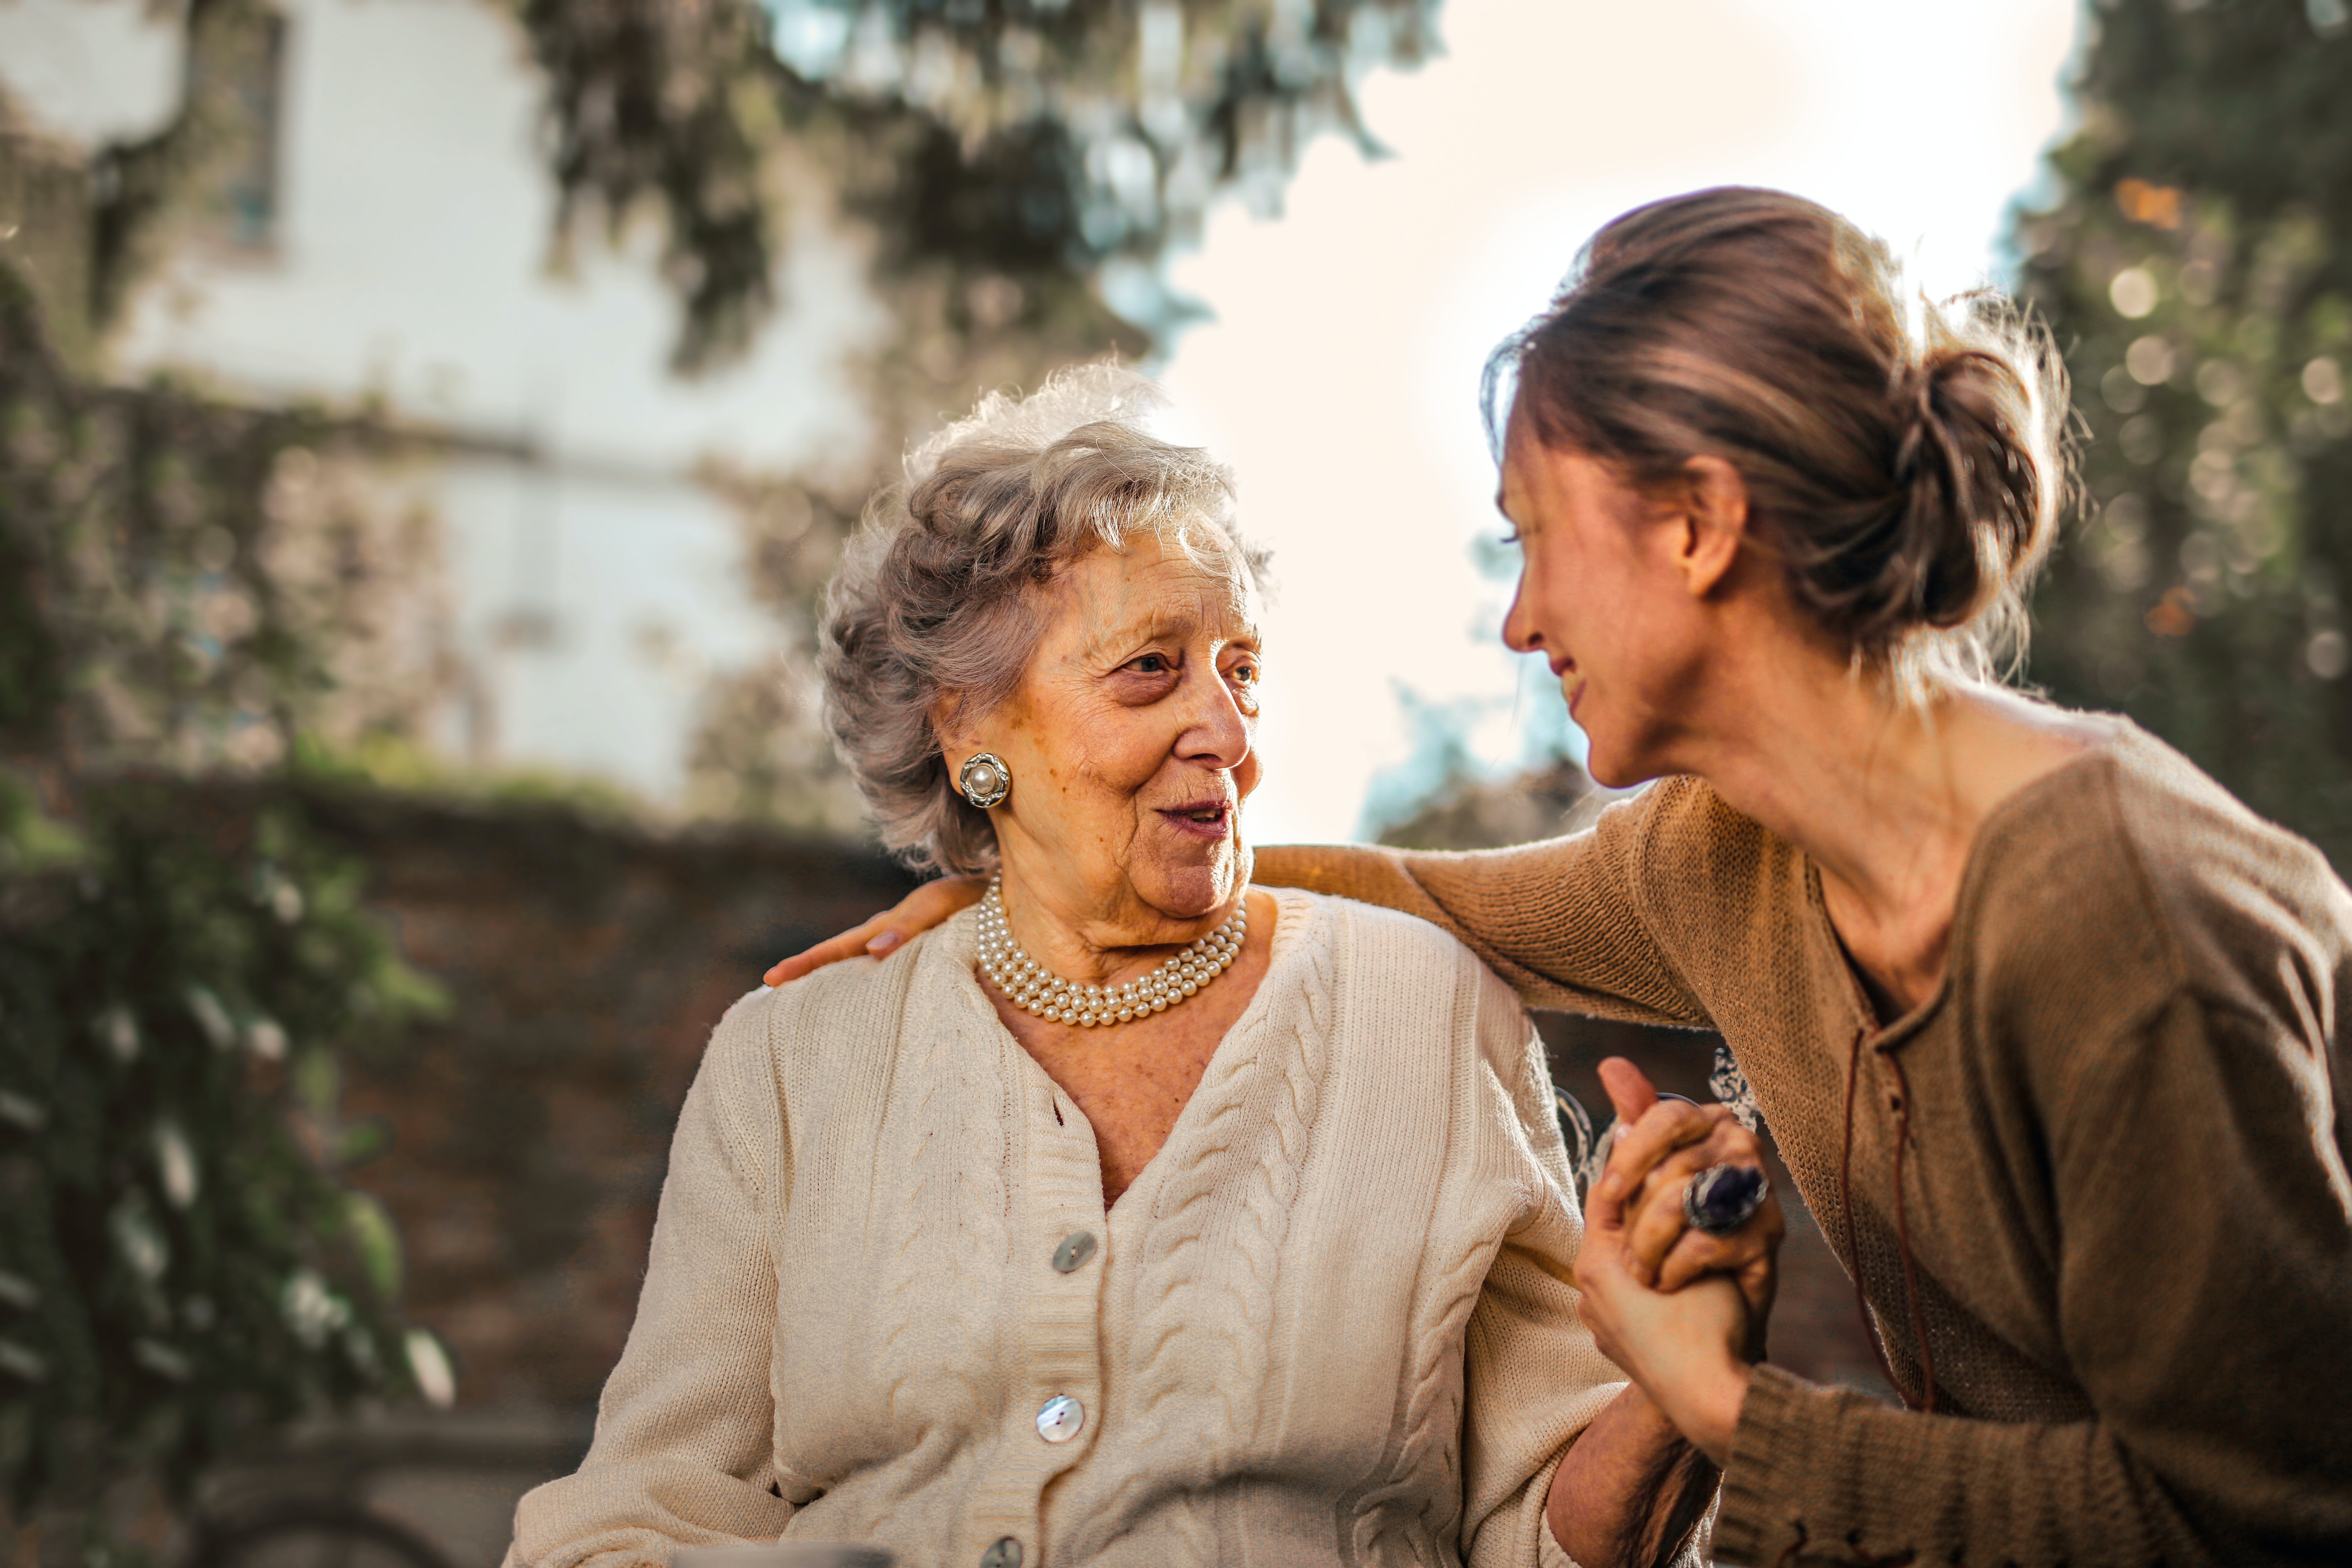 An older woman bonding with a younger one while seated on a bench | Source: Pexels